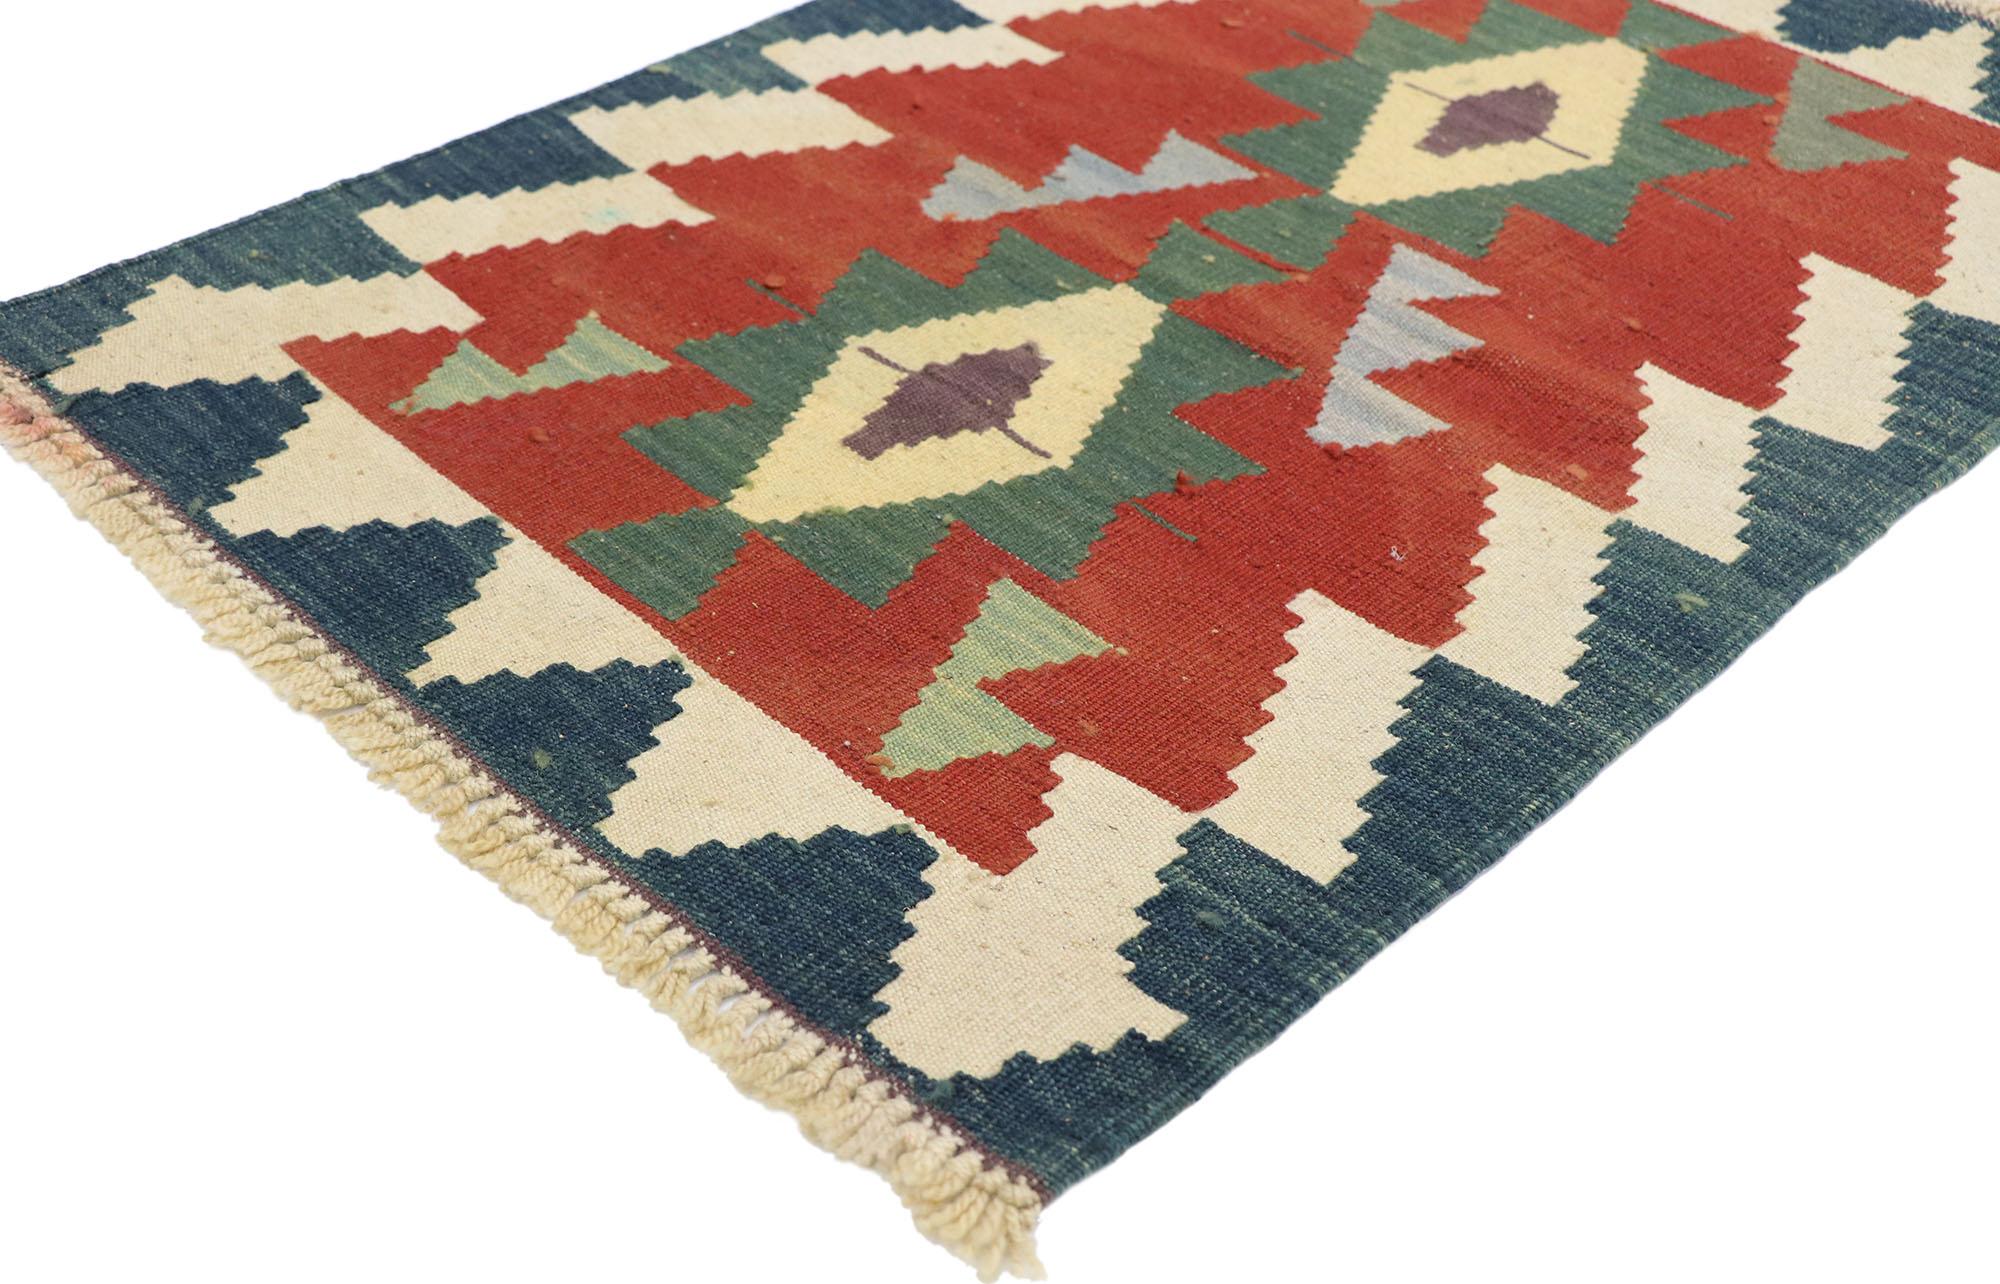 77879, Vintage Persian Shiraz Kilim rug with Tribal Style 02'00 x 02'11. Full of tiny details and a bold expressive design combined with vibrant colors and tribal style, this hand-woven wool vintage Persian Shiraz kilim rug is a captivating vision